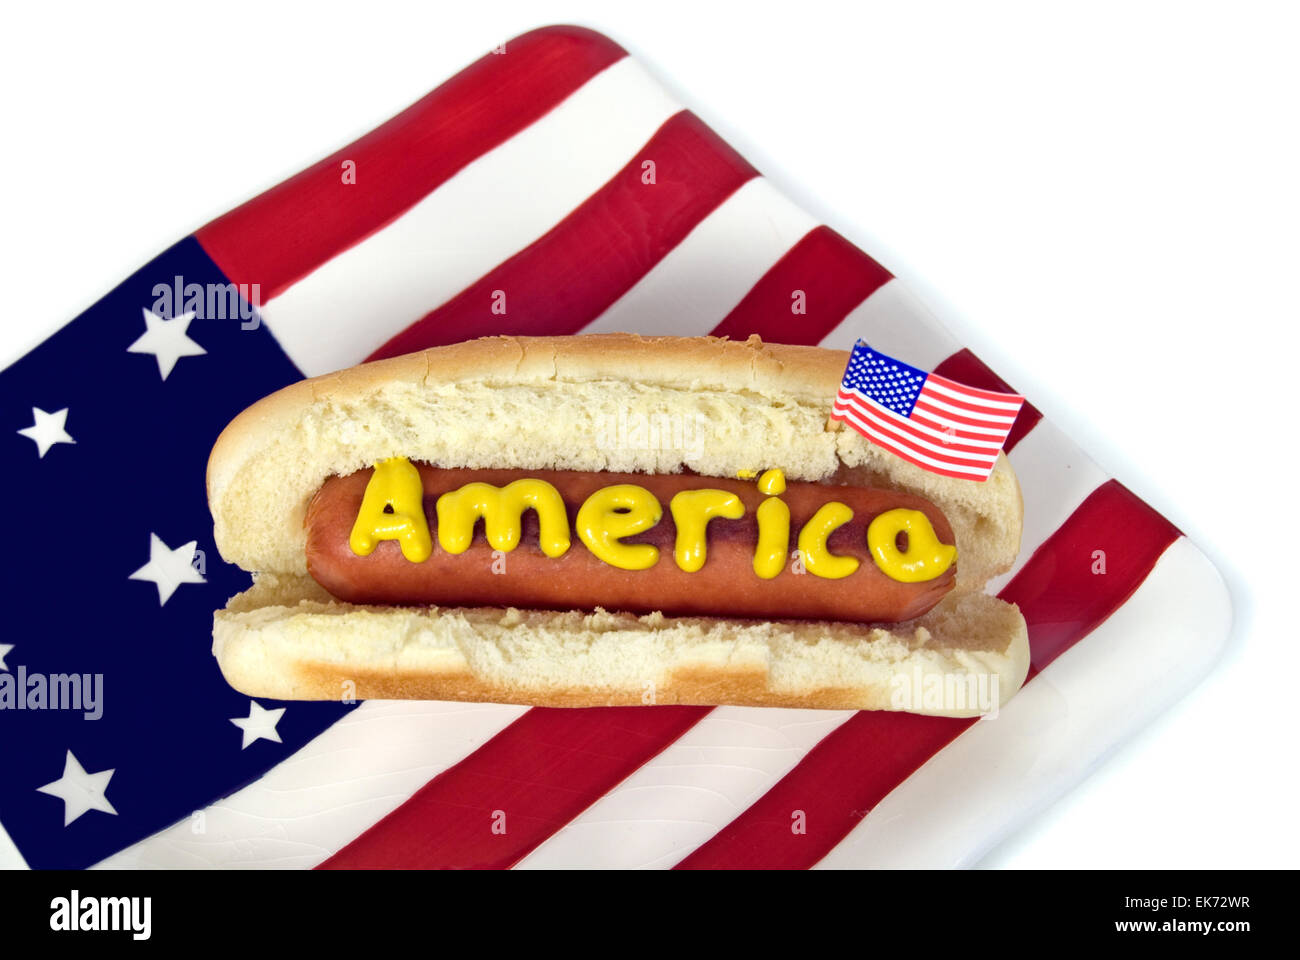 Mustard on hot dog with American flag and plate isolated on white. Stock Photo